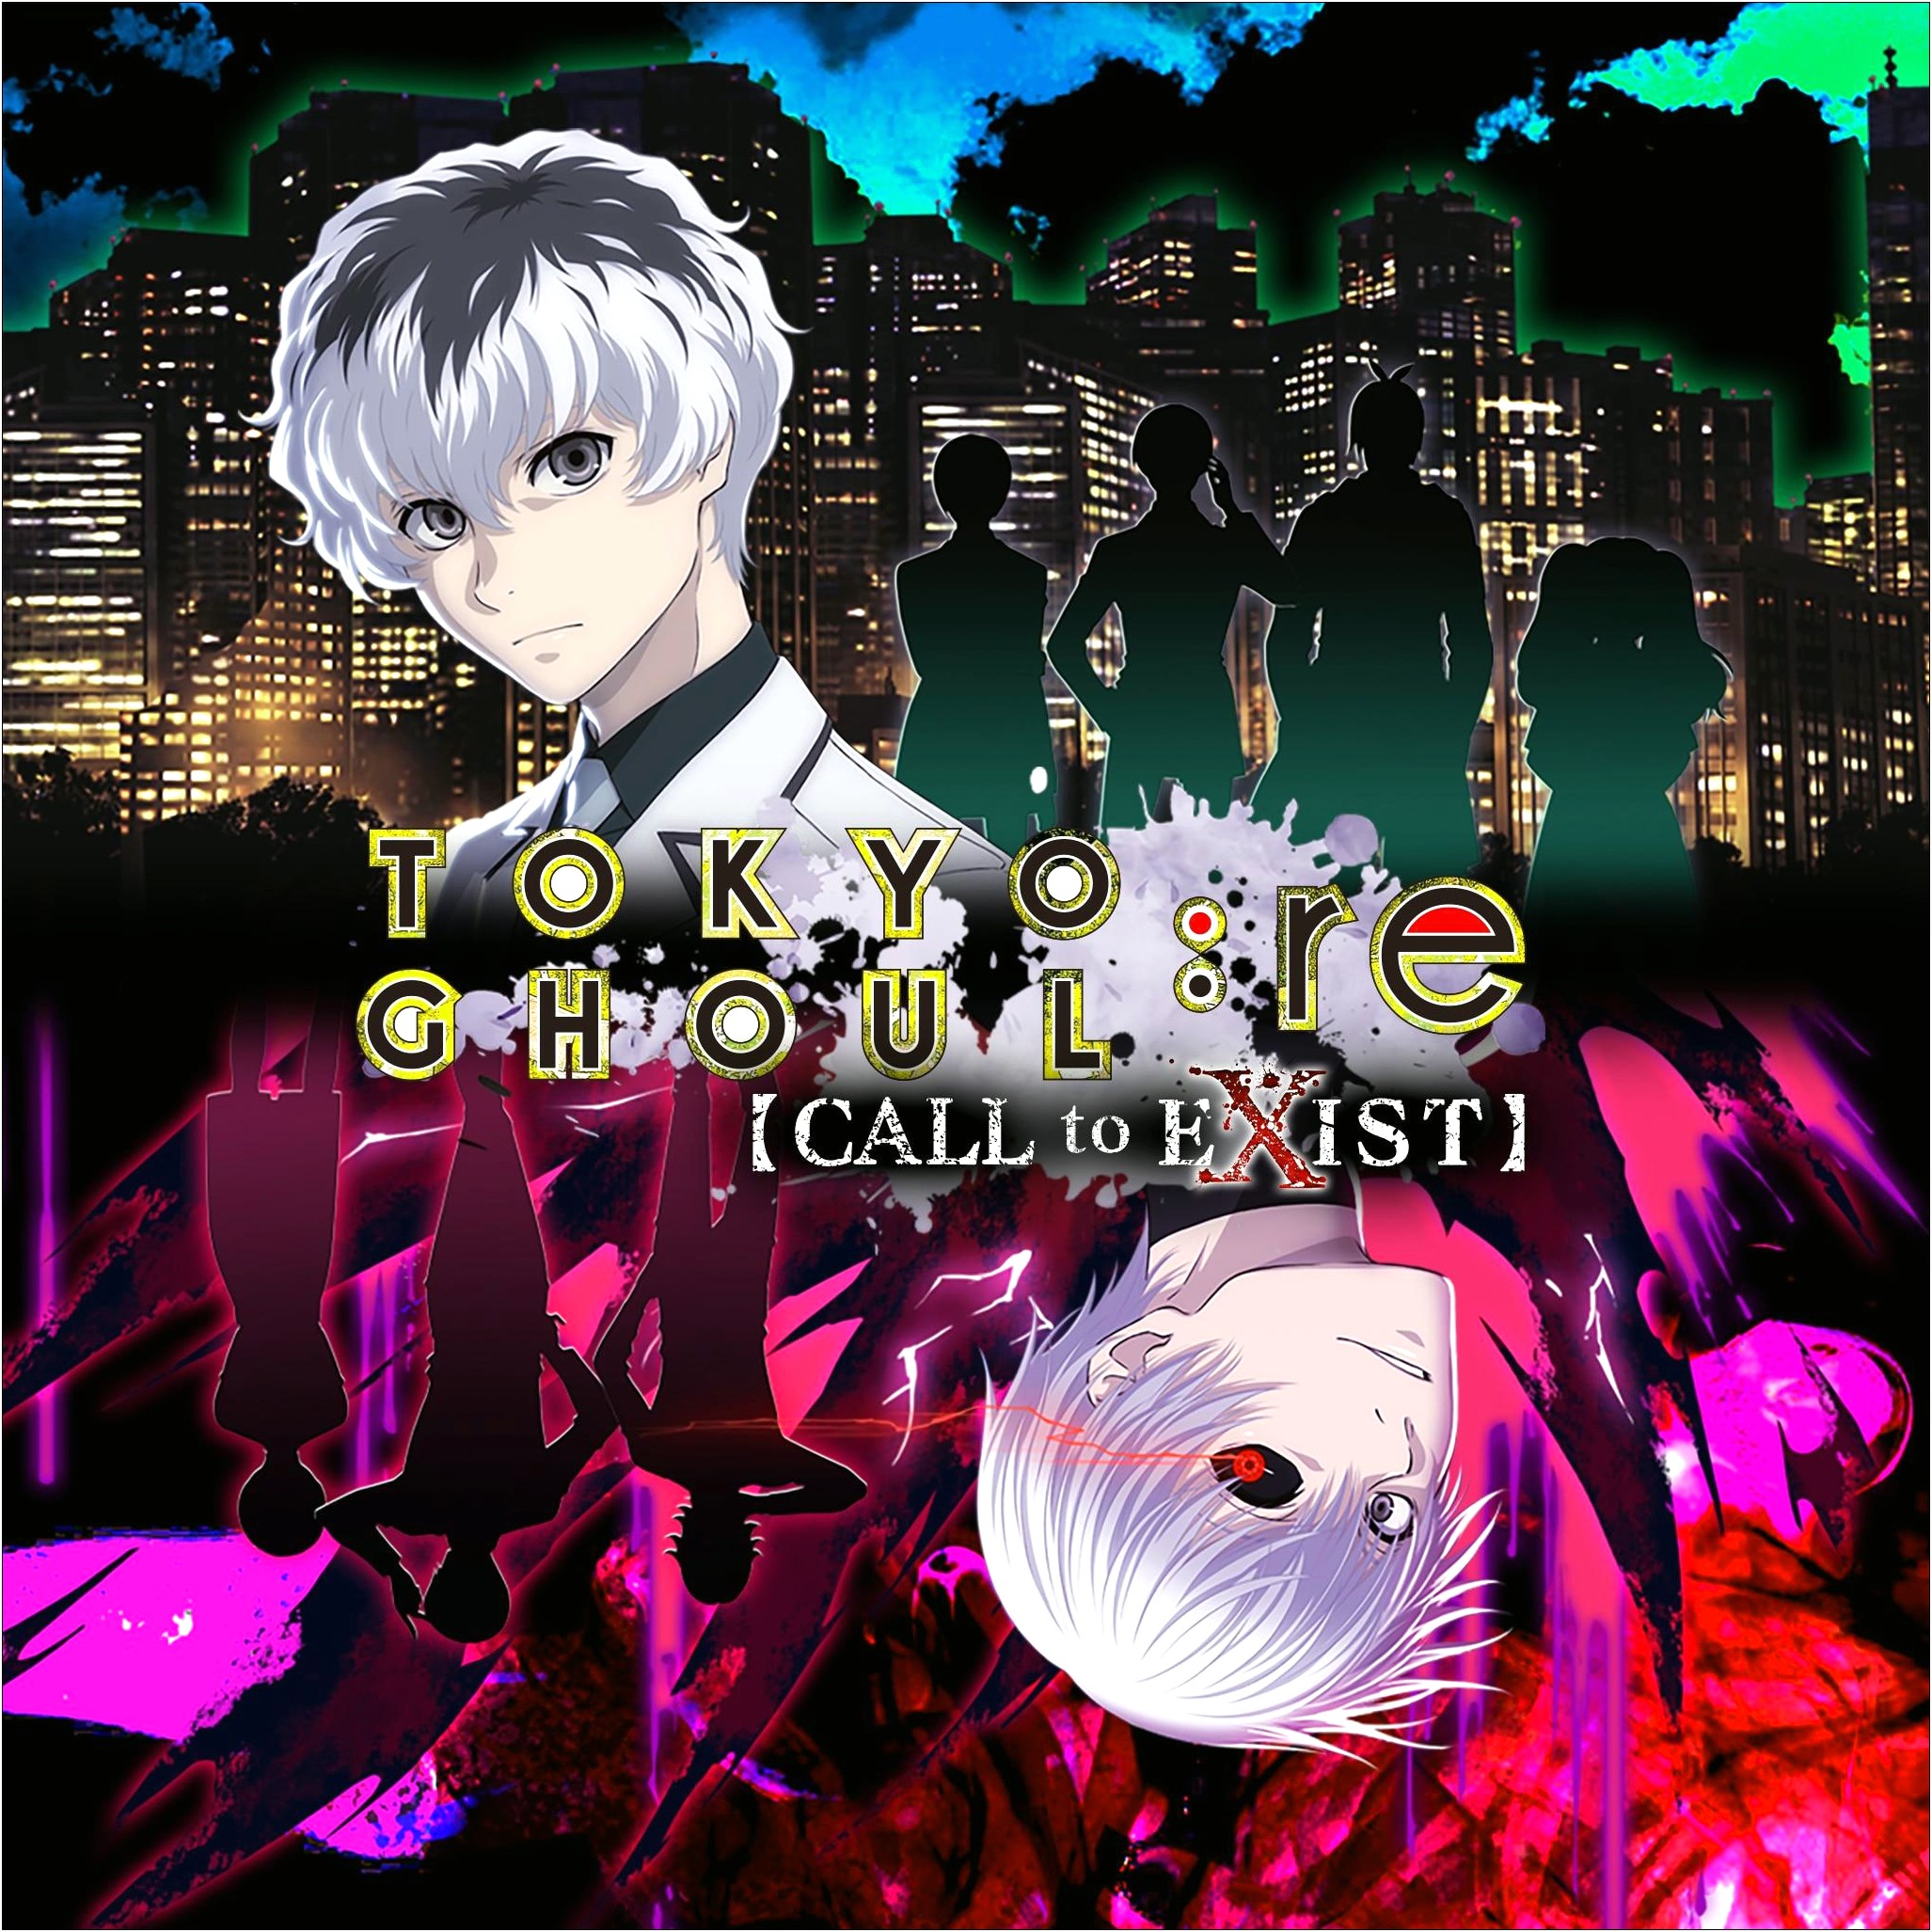 Download Template Blog Anime Tokyo Ghoul